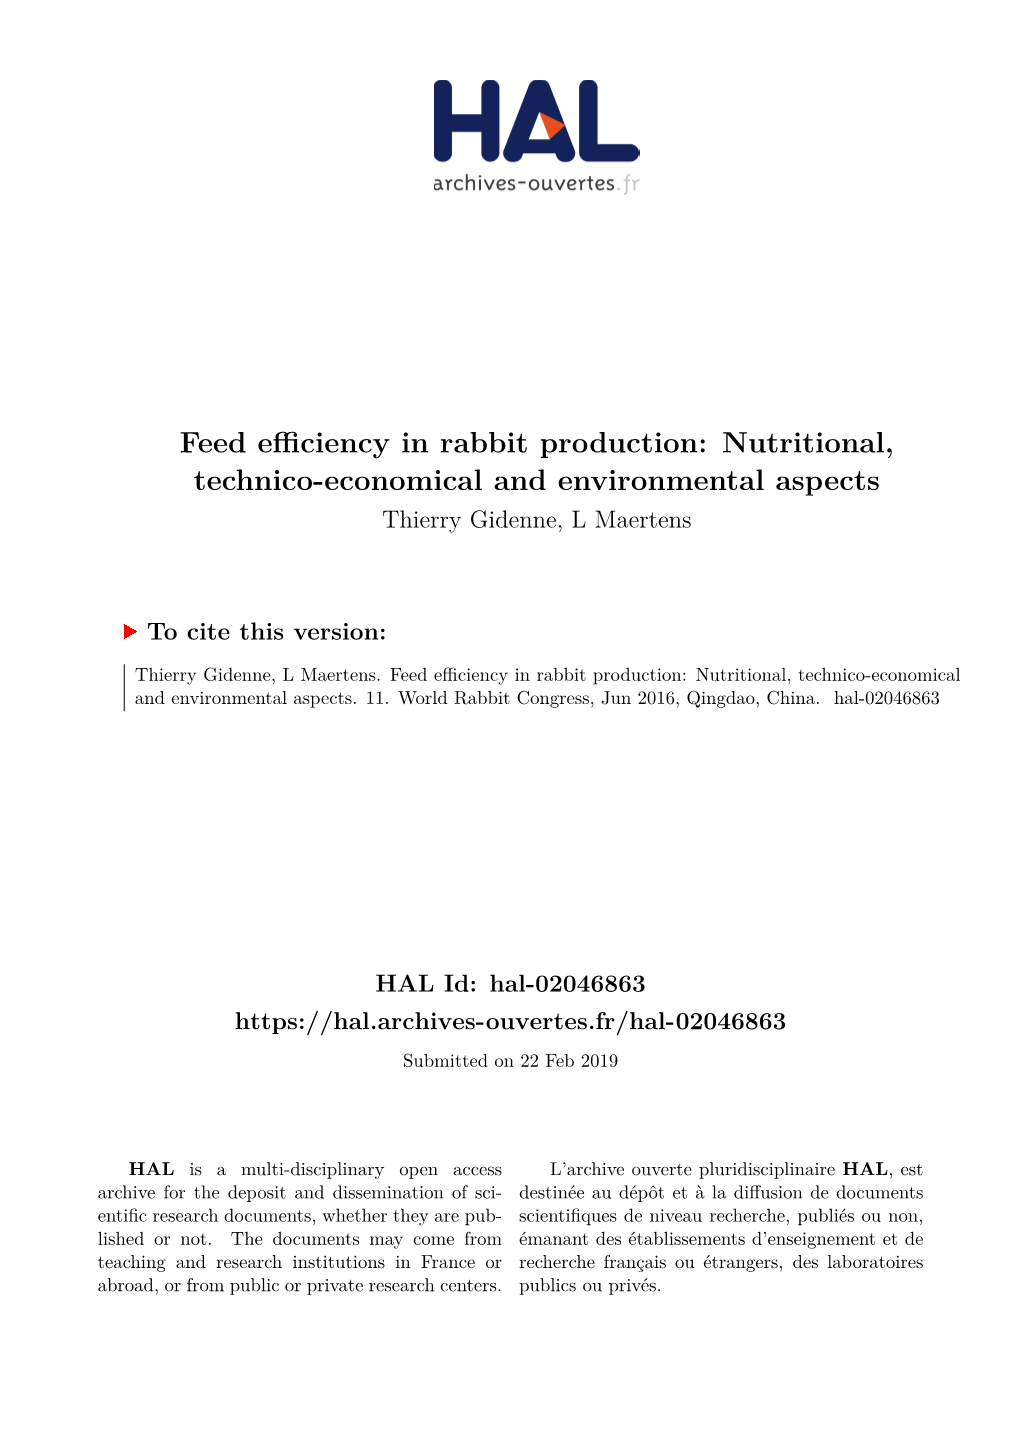 Feed Efficiency in Rabbit Production: Nutritional, Technico-Economical and Environmental Aspects